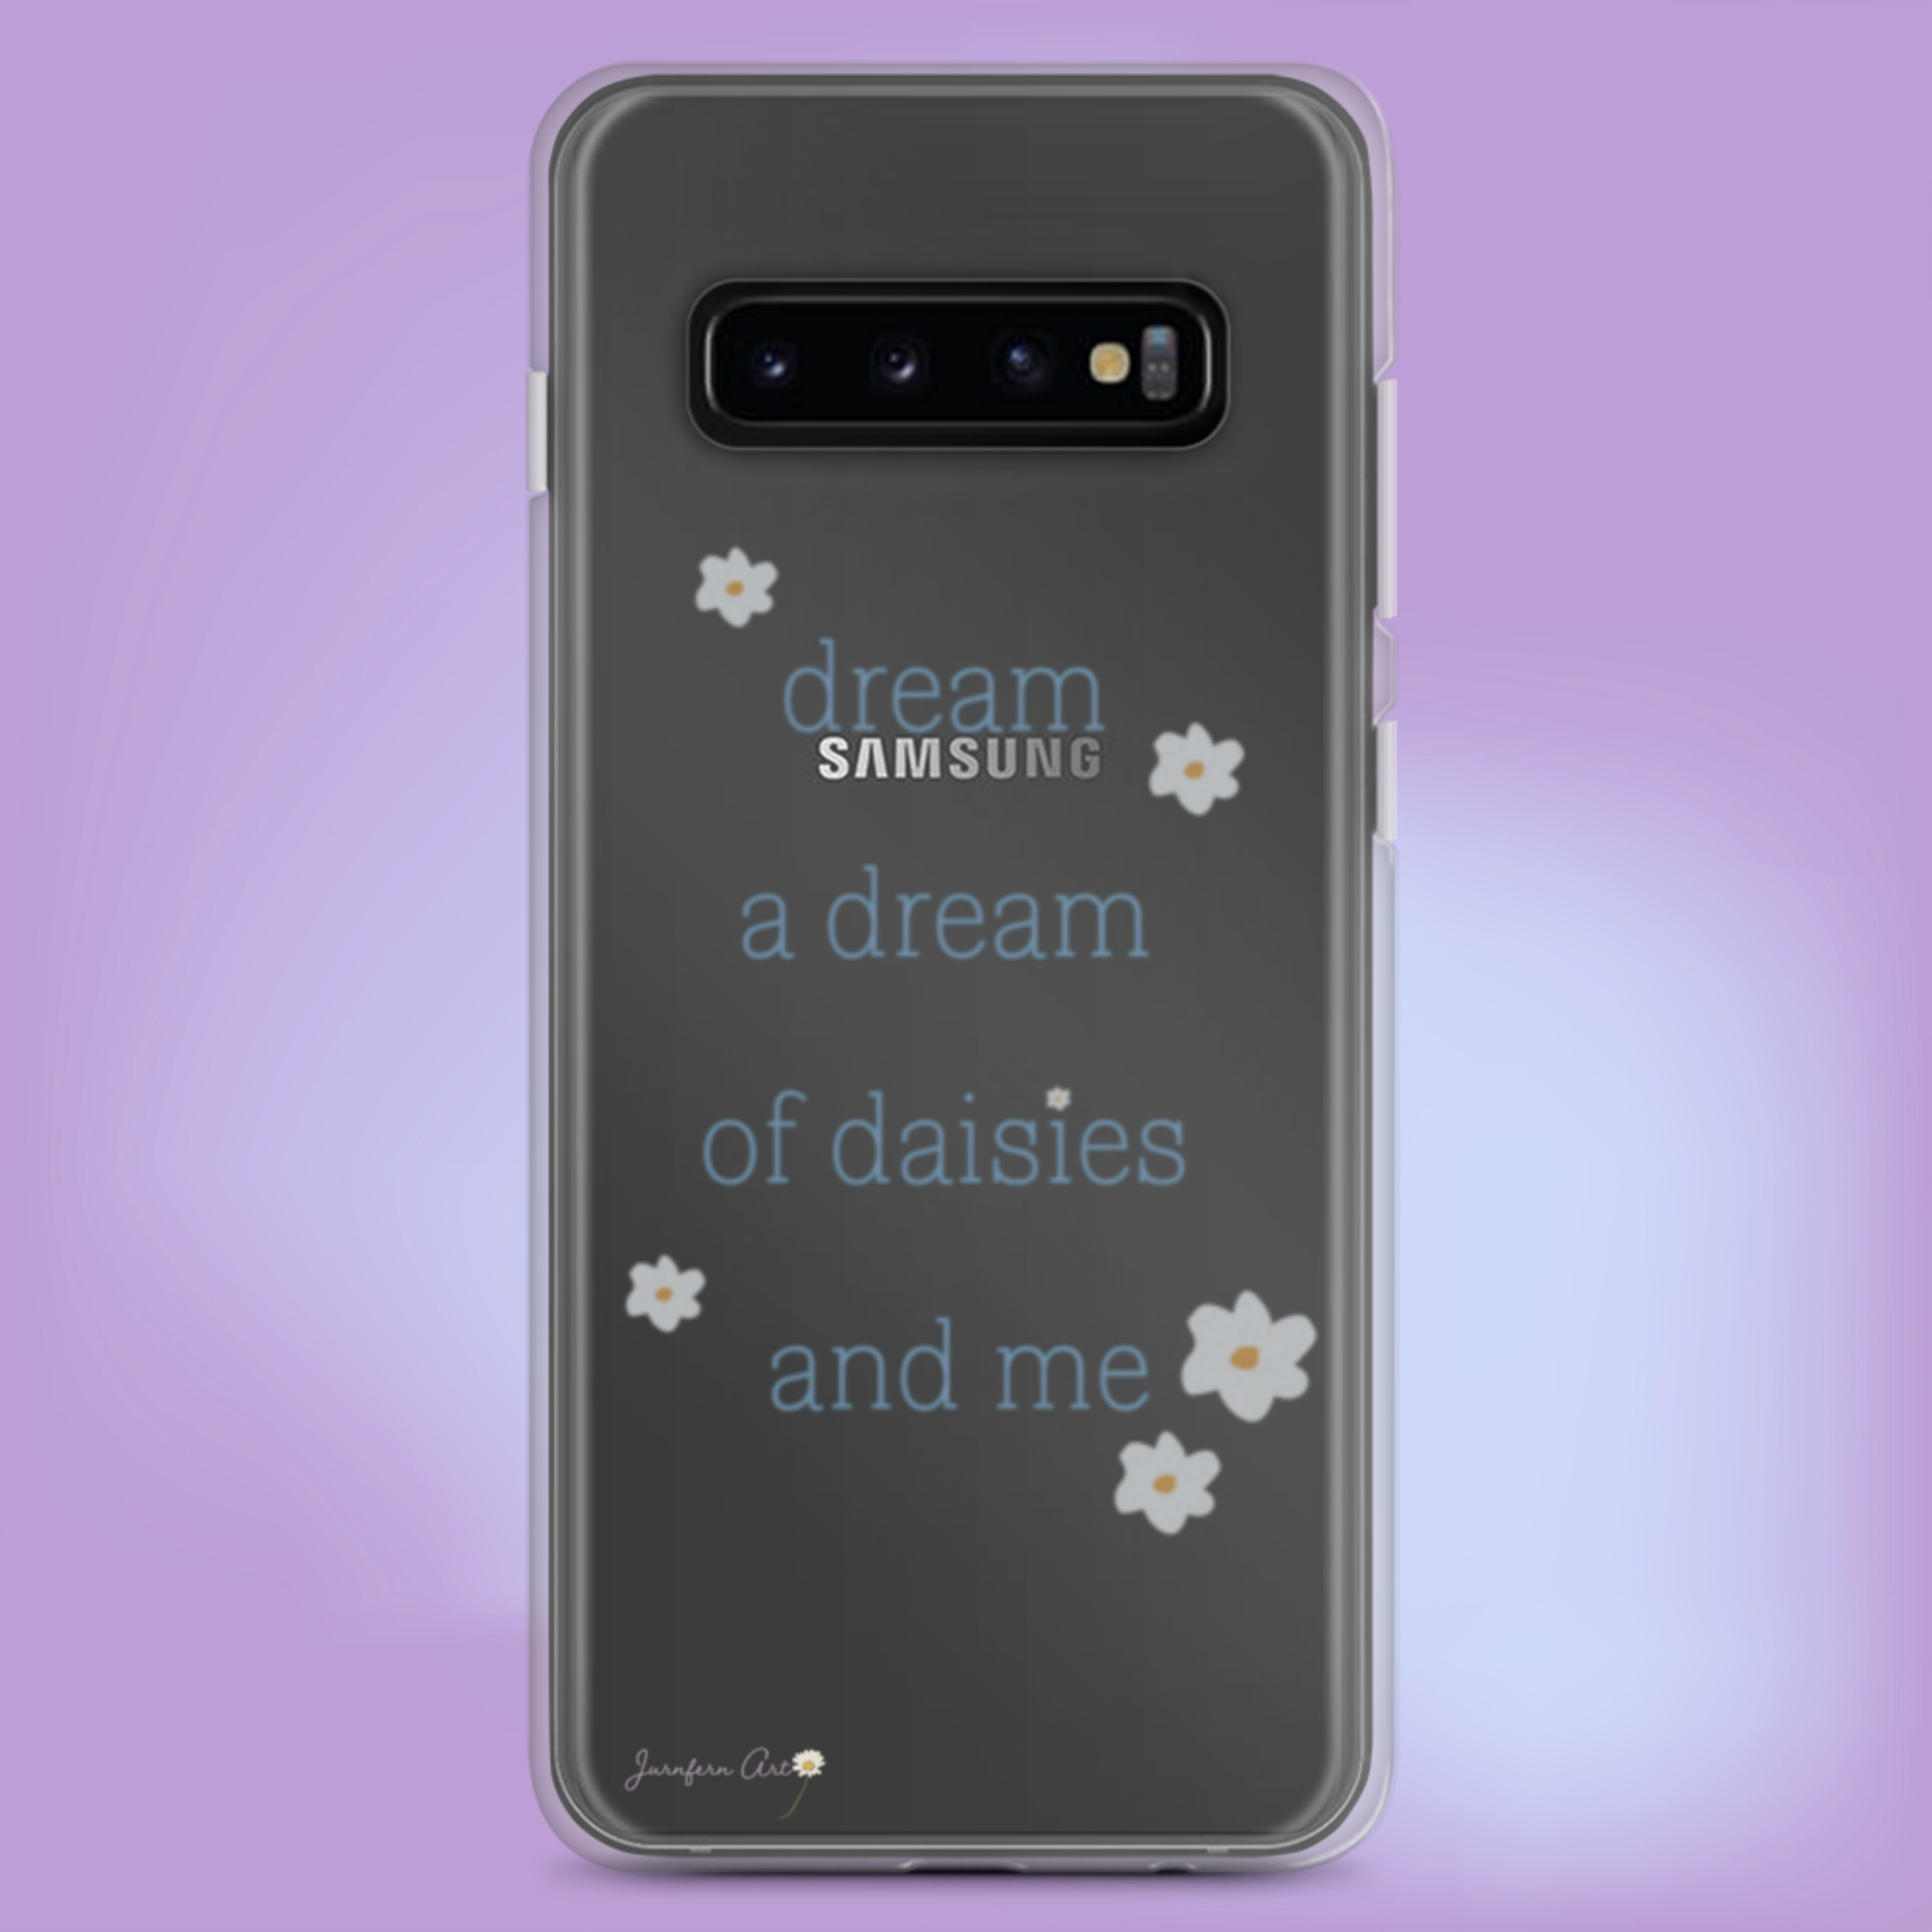 A transparent Samsung Galaxy S10 phone case with blue text on it that reads "dream a dream of daisies and me" surrounded by small daisies